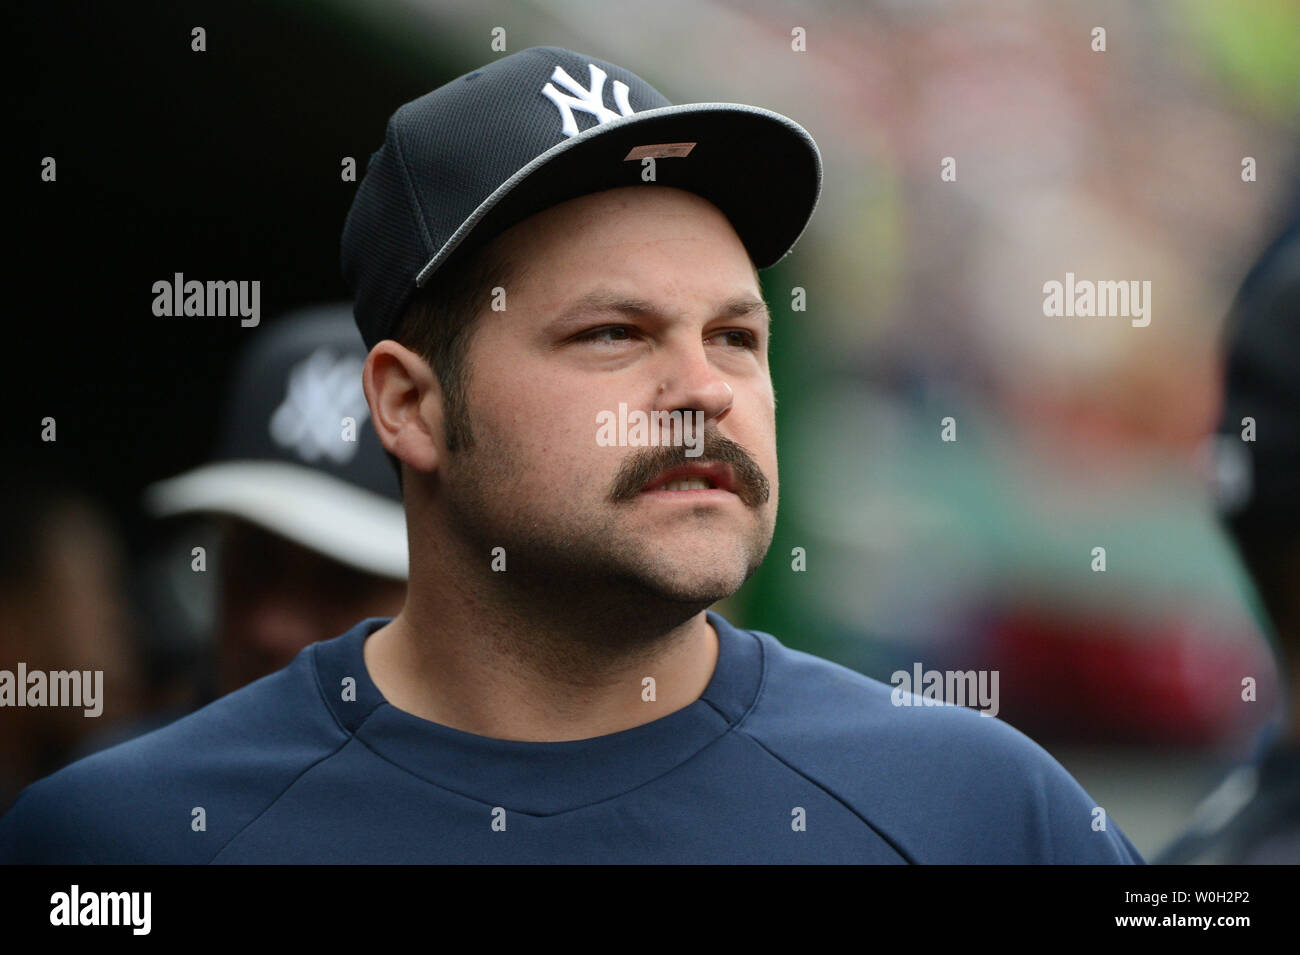 New York Yankees pitcher Joba Chamberlain is seen in the dugout as the Yankees play the Washington Nationals at Nationals Park on Mach 29, 2013 in Washington, D.C. UPI/Kevin Dietsch Stock Photo